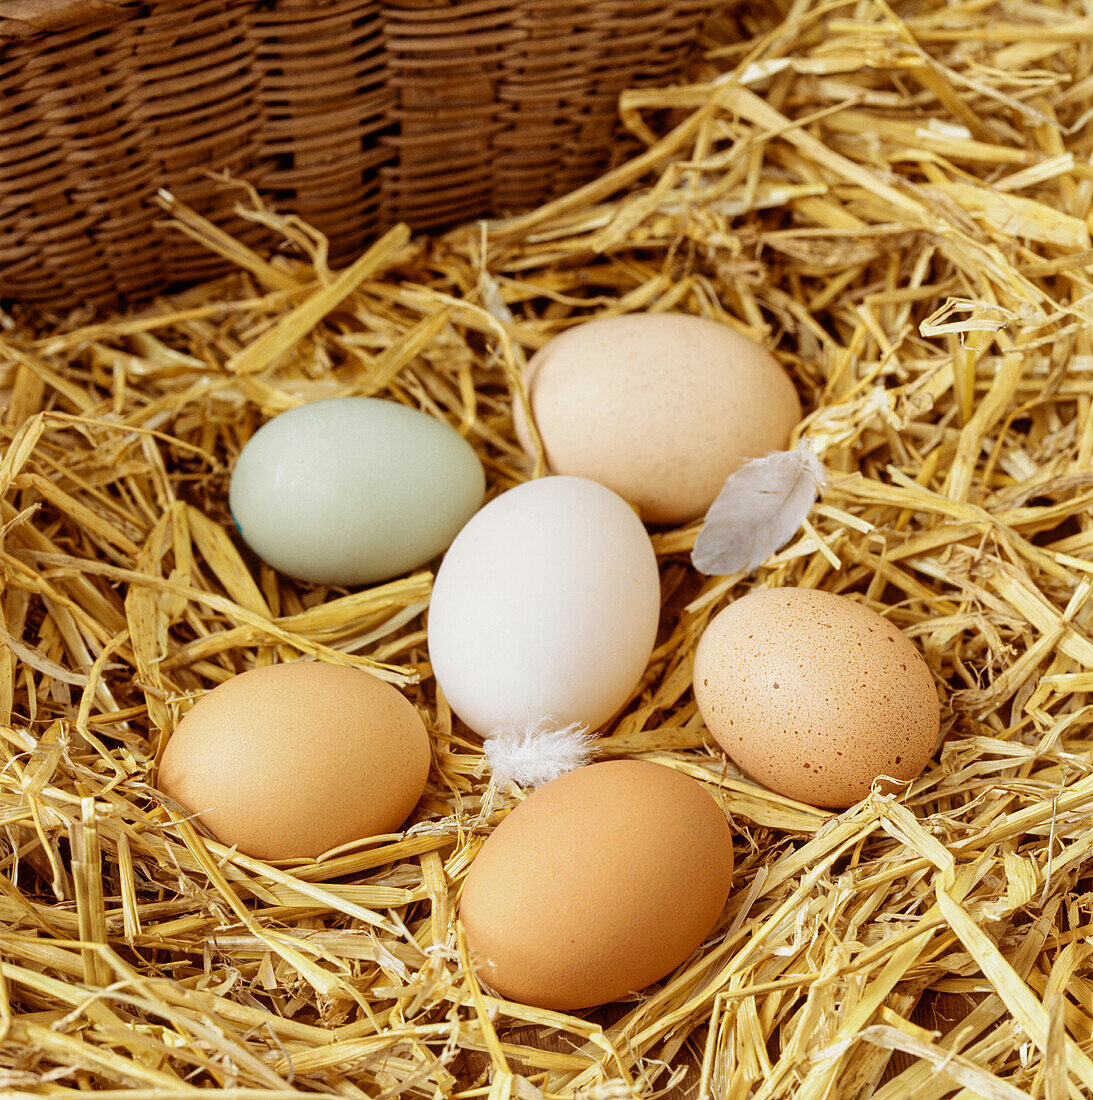 Freshly laid chicken eggs in a straw nest